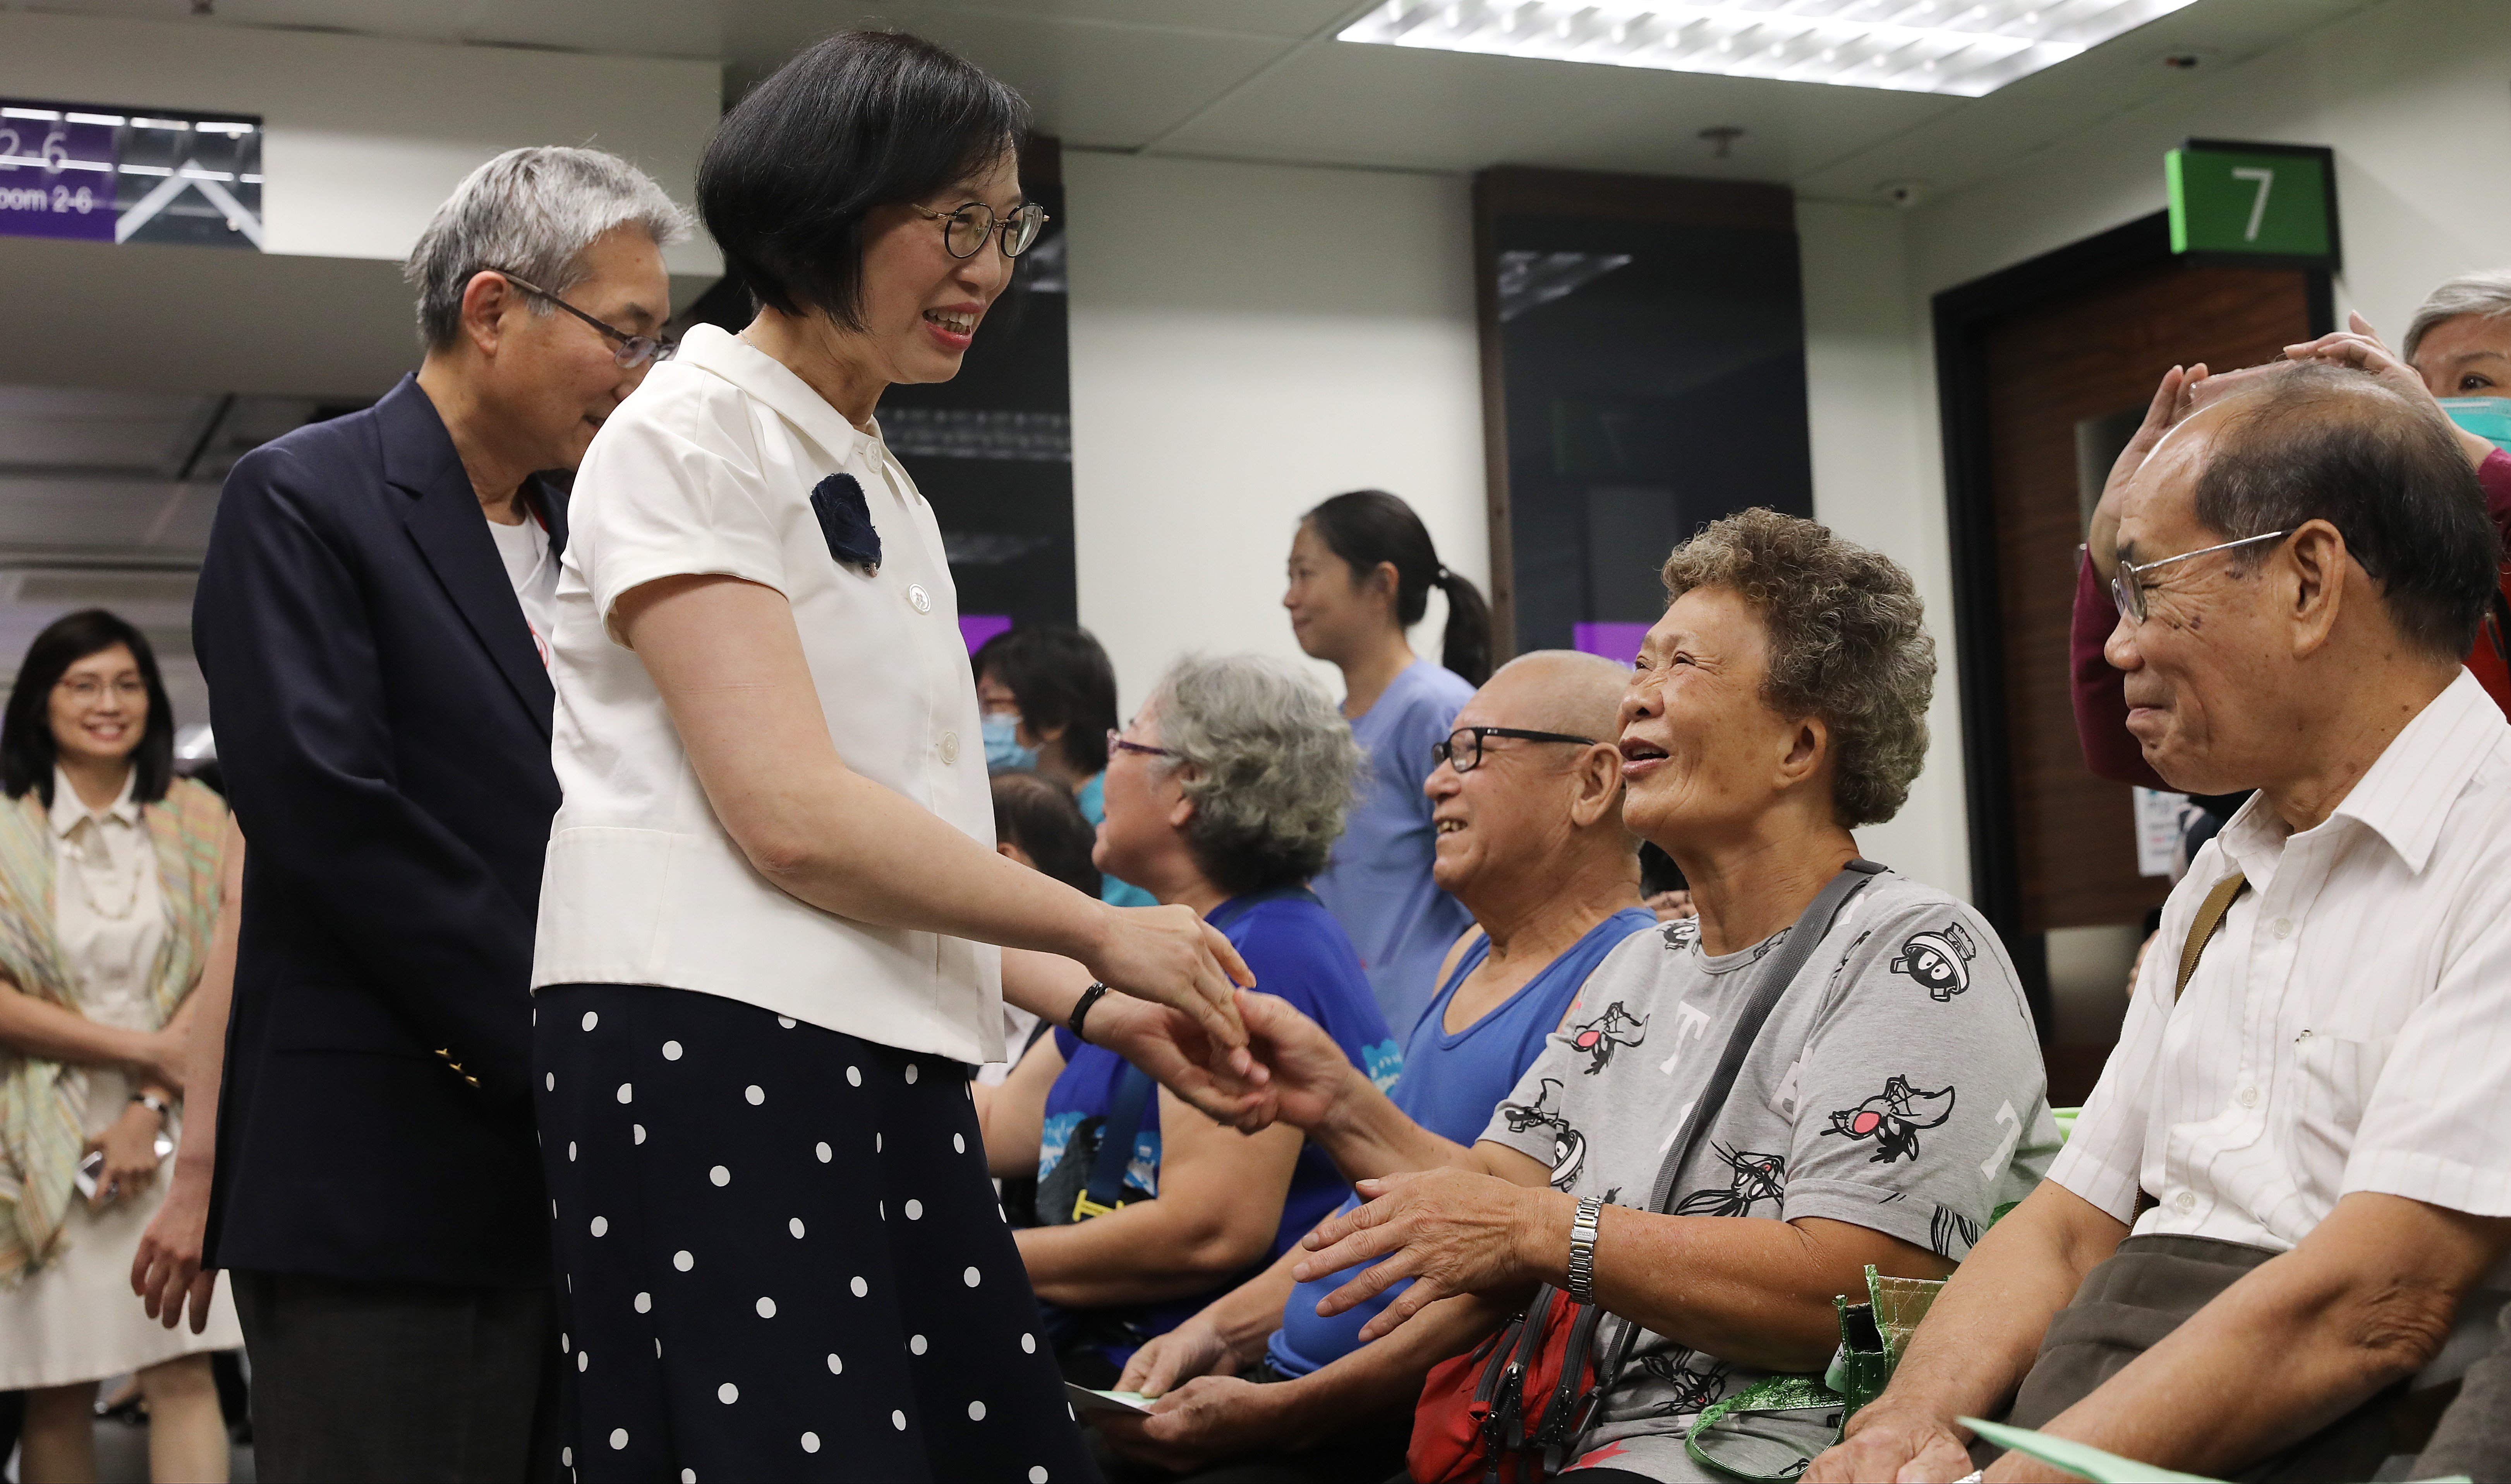 Hong Kong’s Secretary for Food and Health Sophia Chan visits the Shau Kei Wan Jockey Club general outpatient clinic to view progress on the implementation of the government vaccination programme for 2017-18. Photo: Sam Tsang